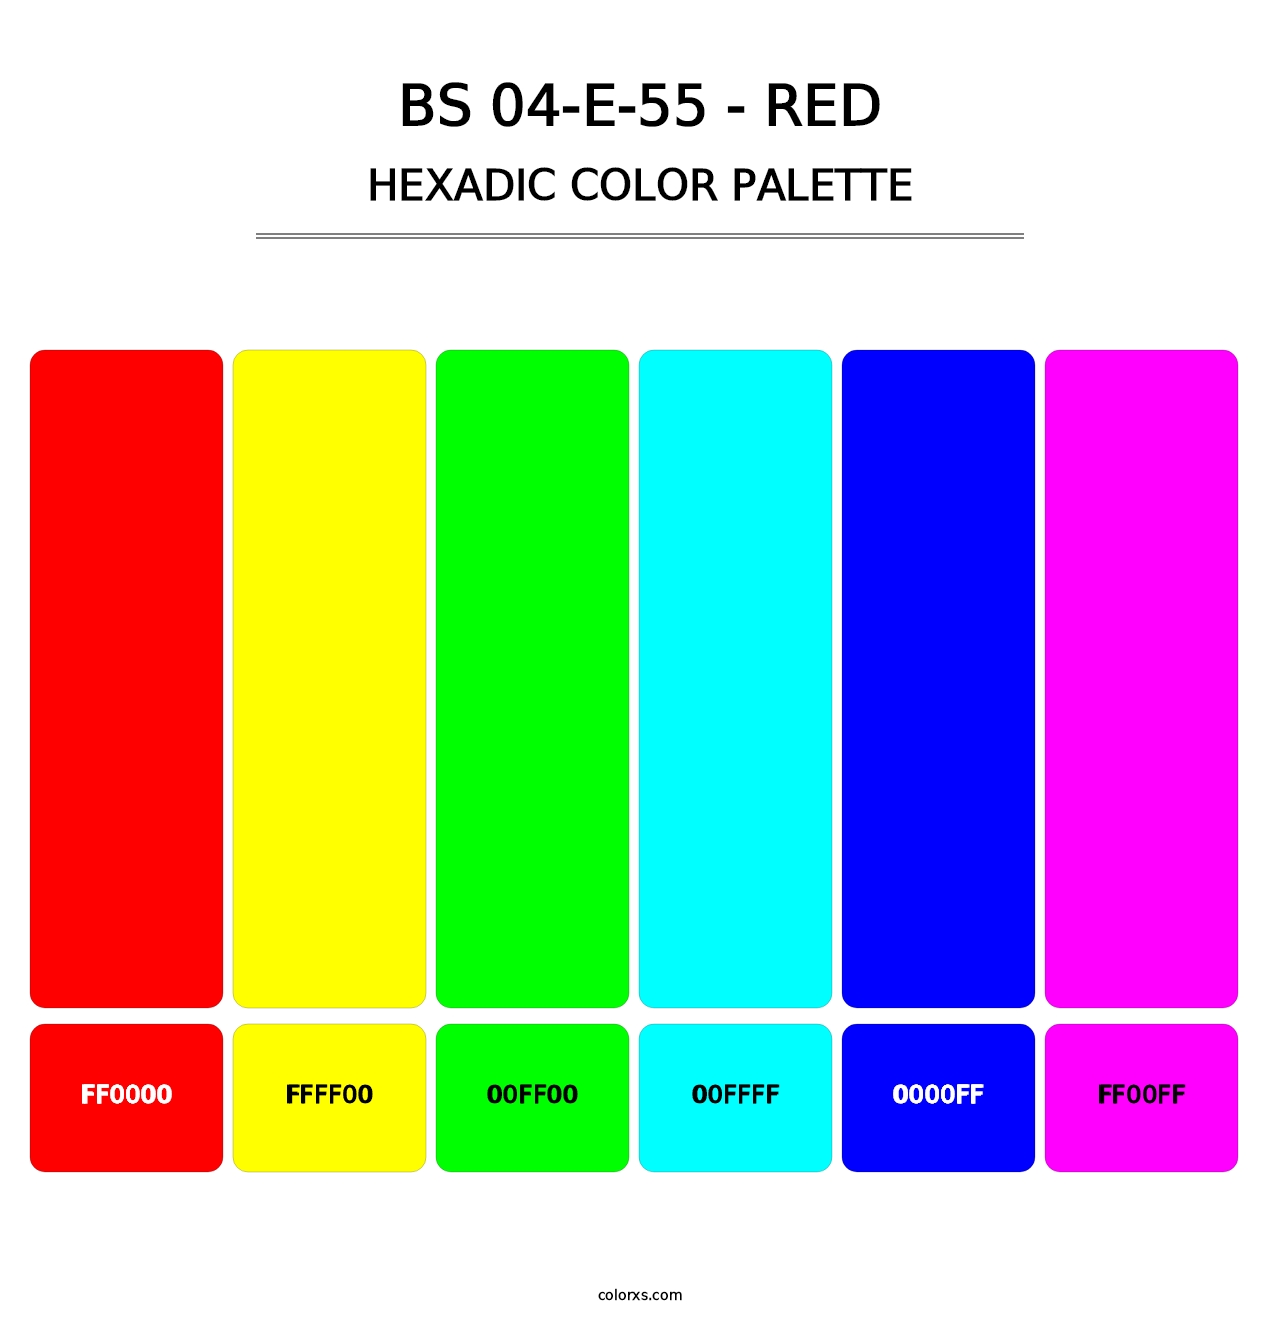 BS 04-E-55 - Red - Hexadic Color Palette